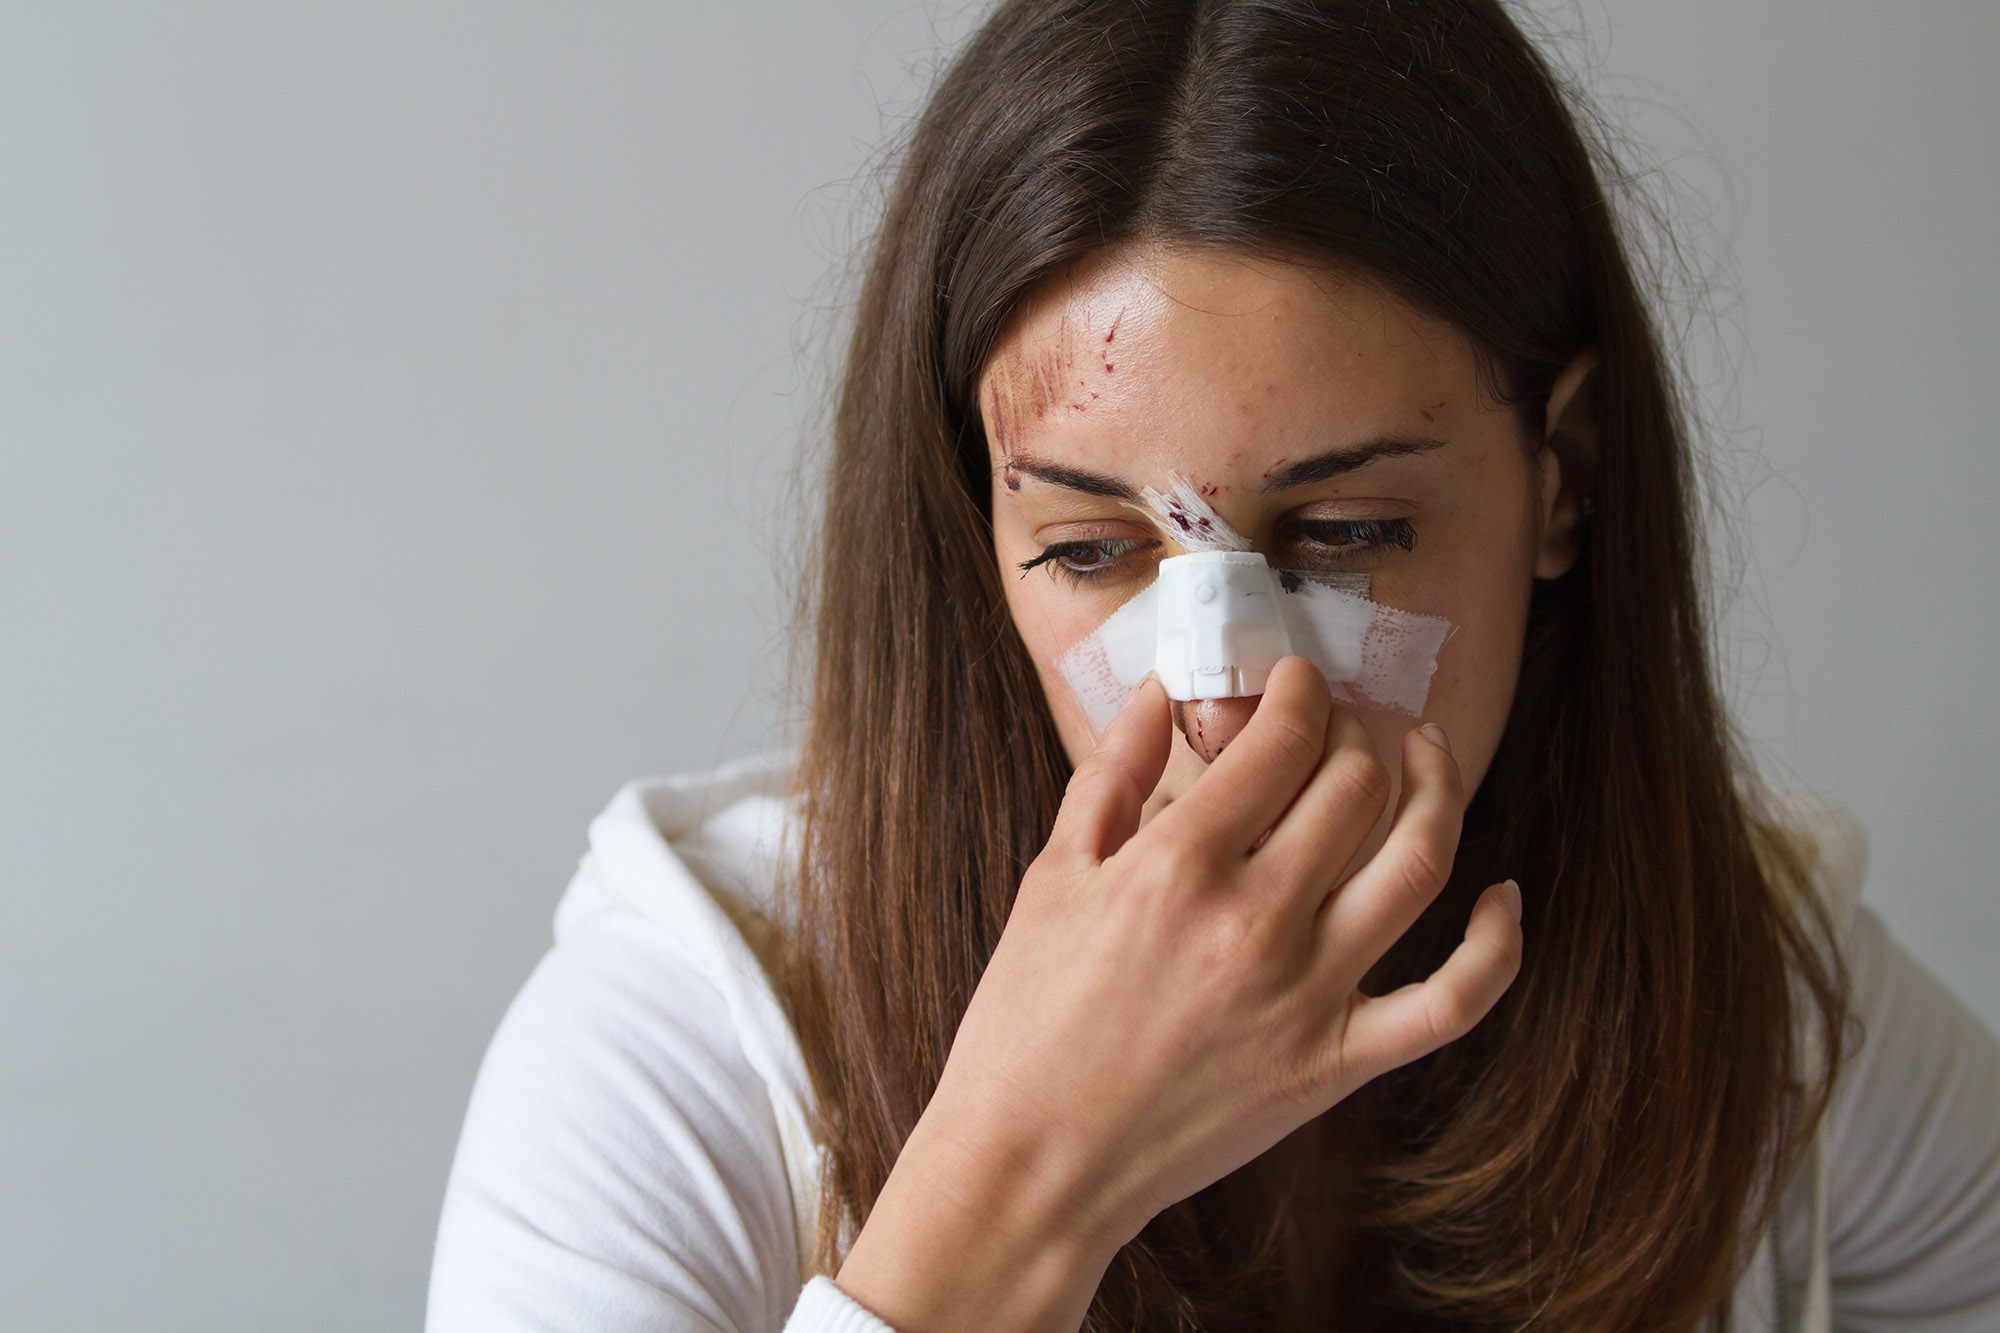 broken nose personal injury compensation claims solicitors Aberdeen